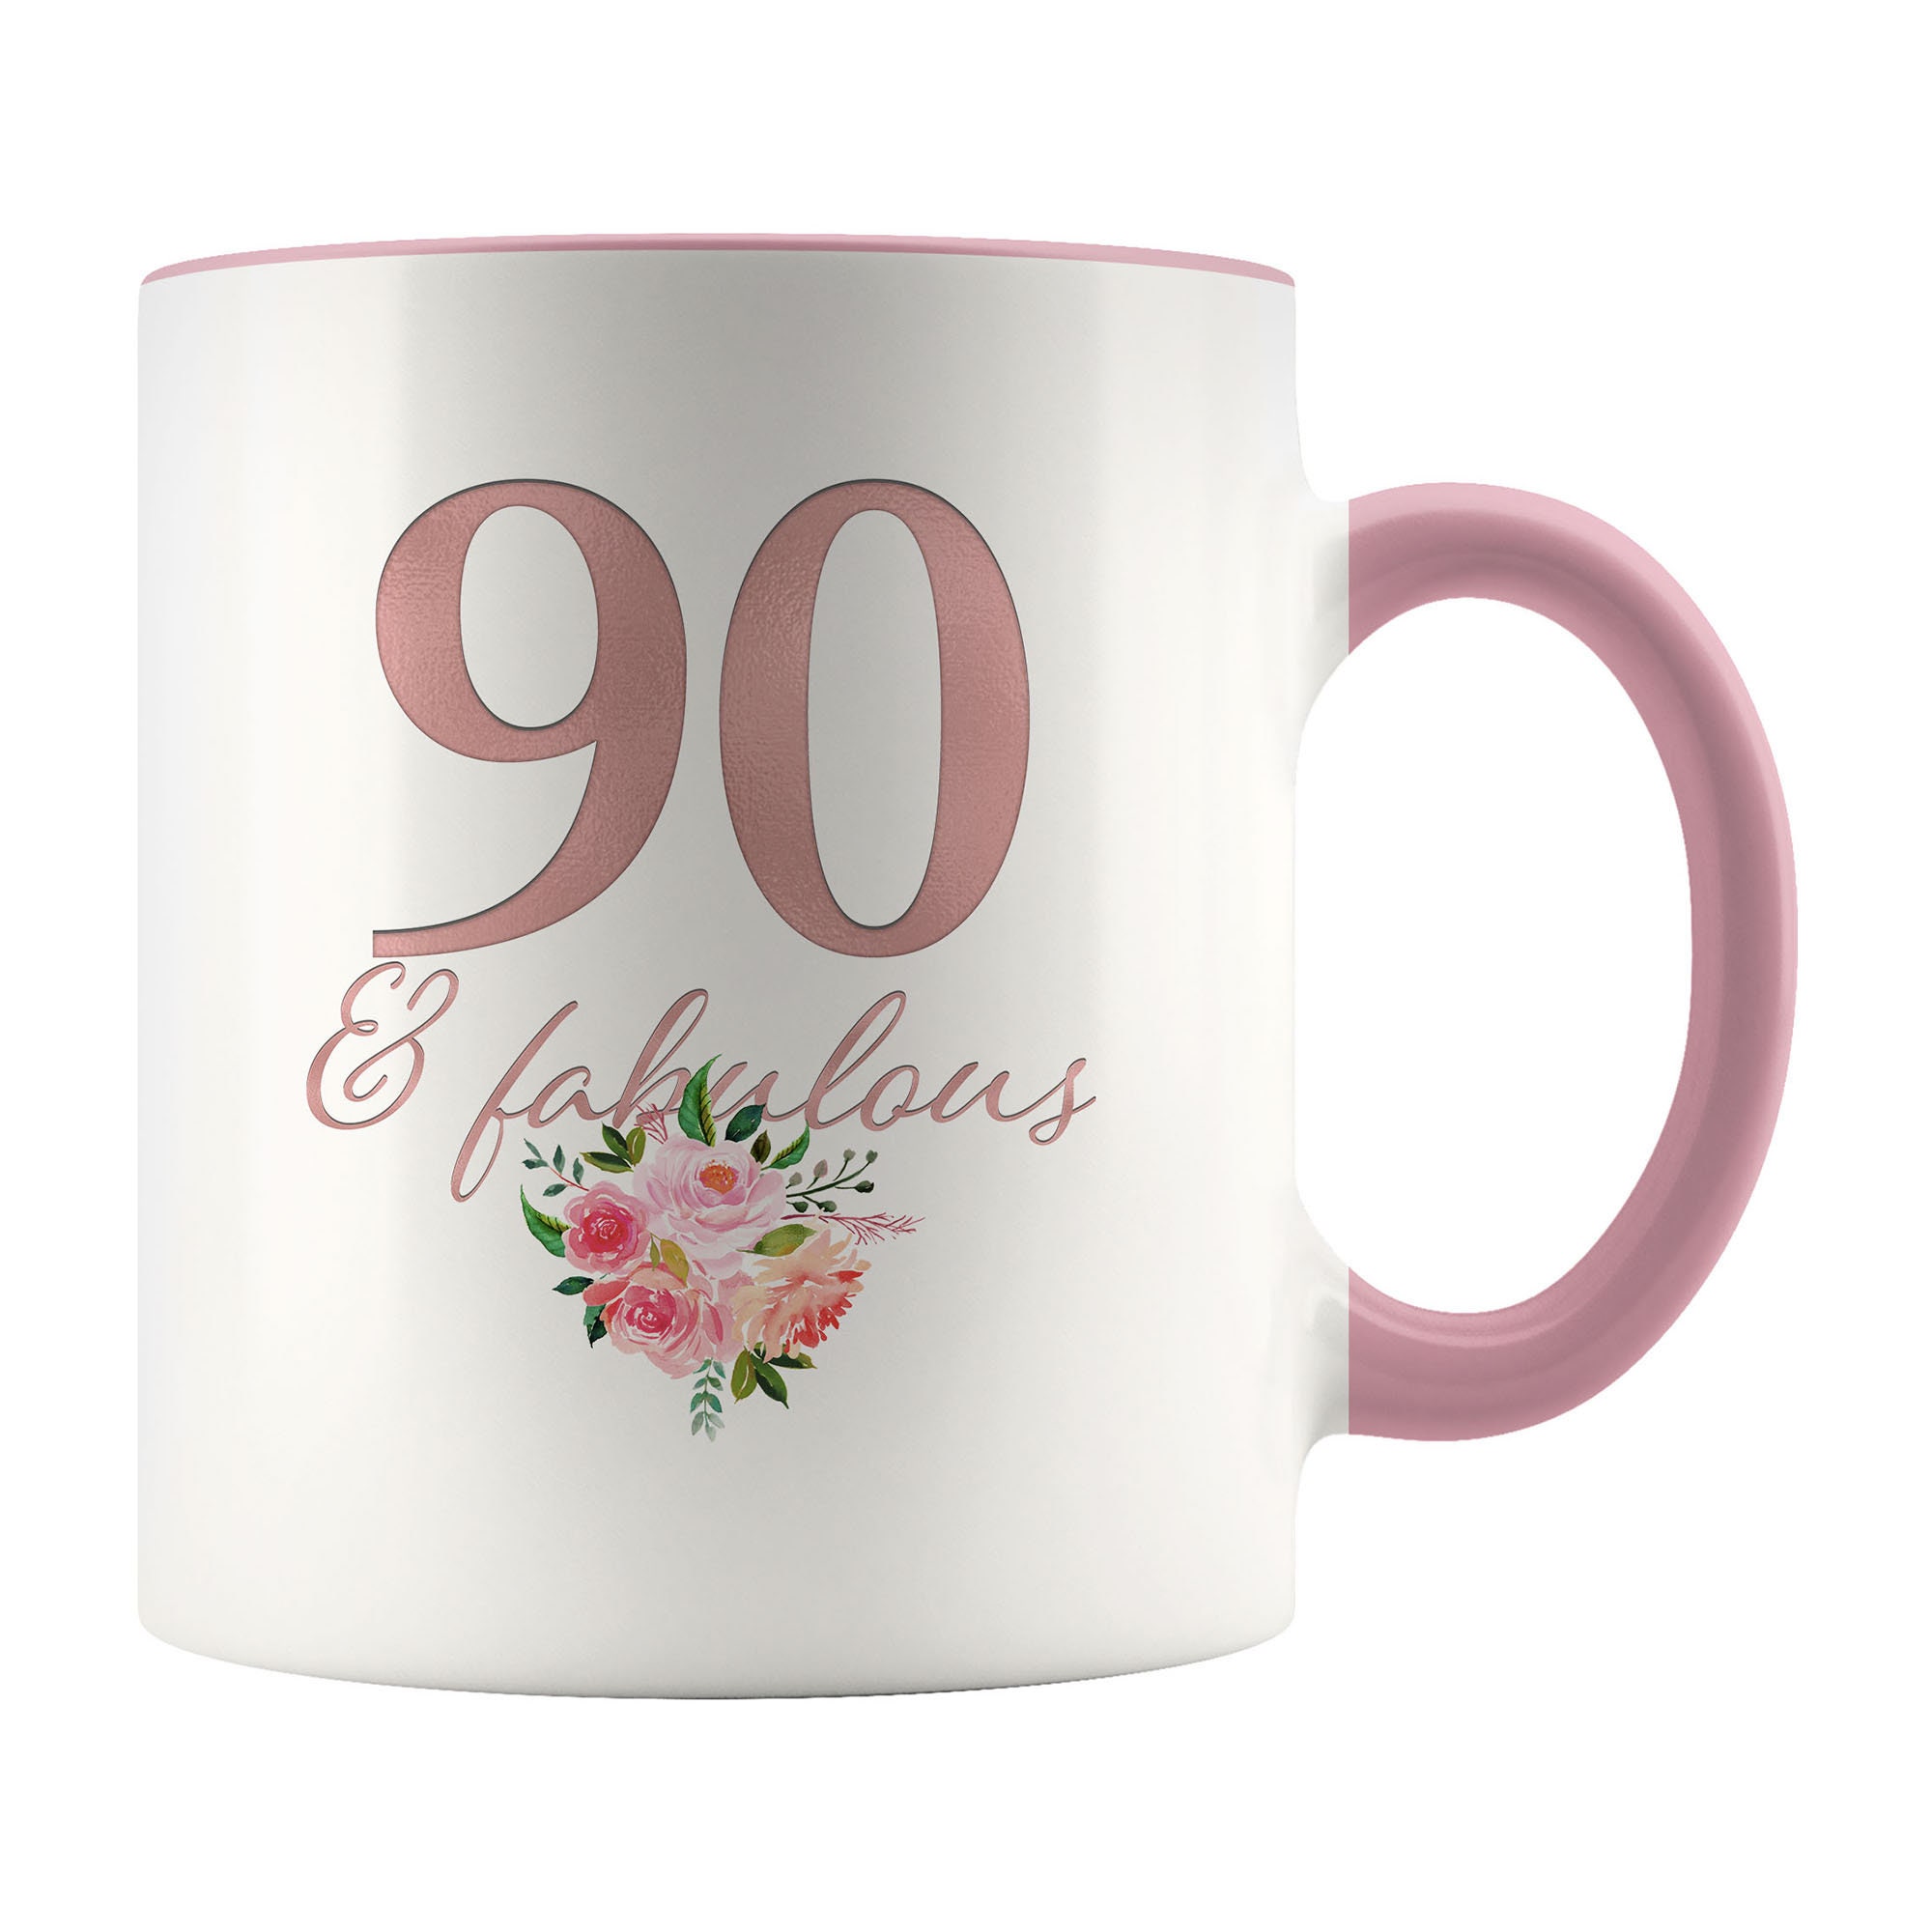 90th Birthday Gift for Her 90 and Fabulous Coffee Mug for